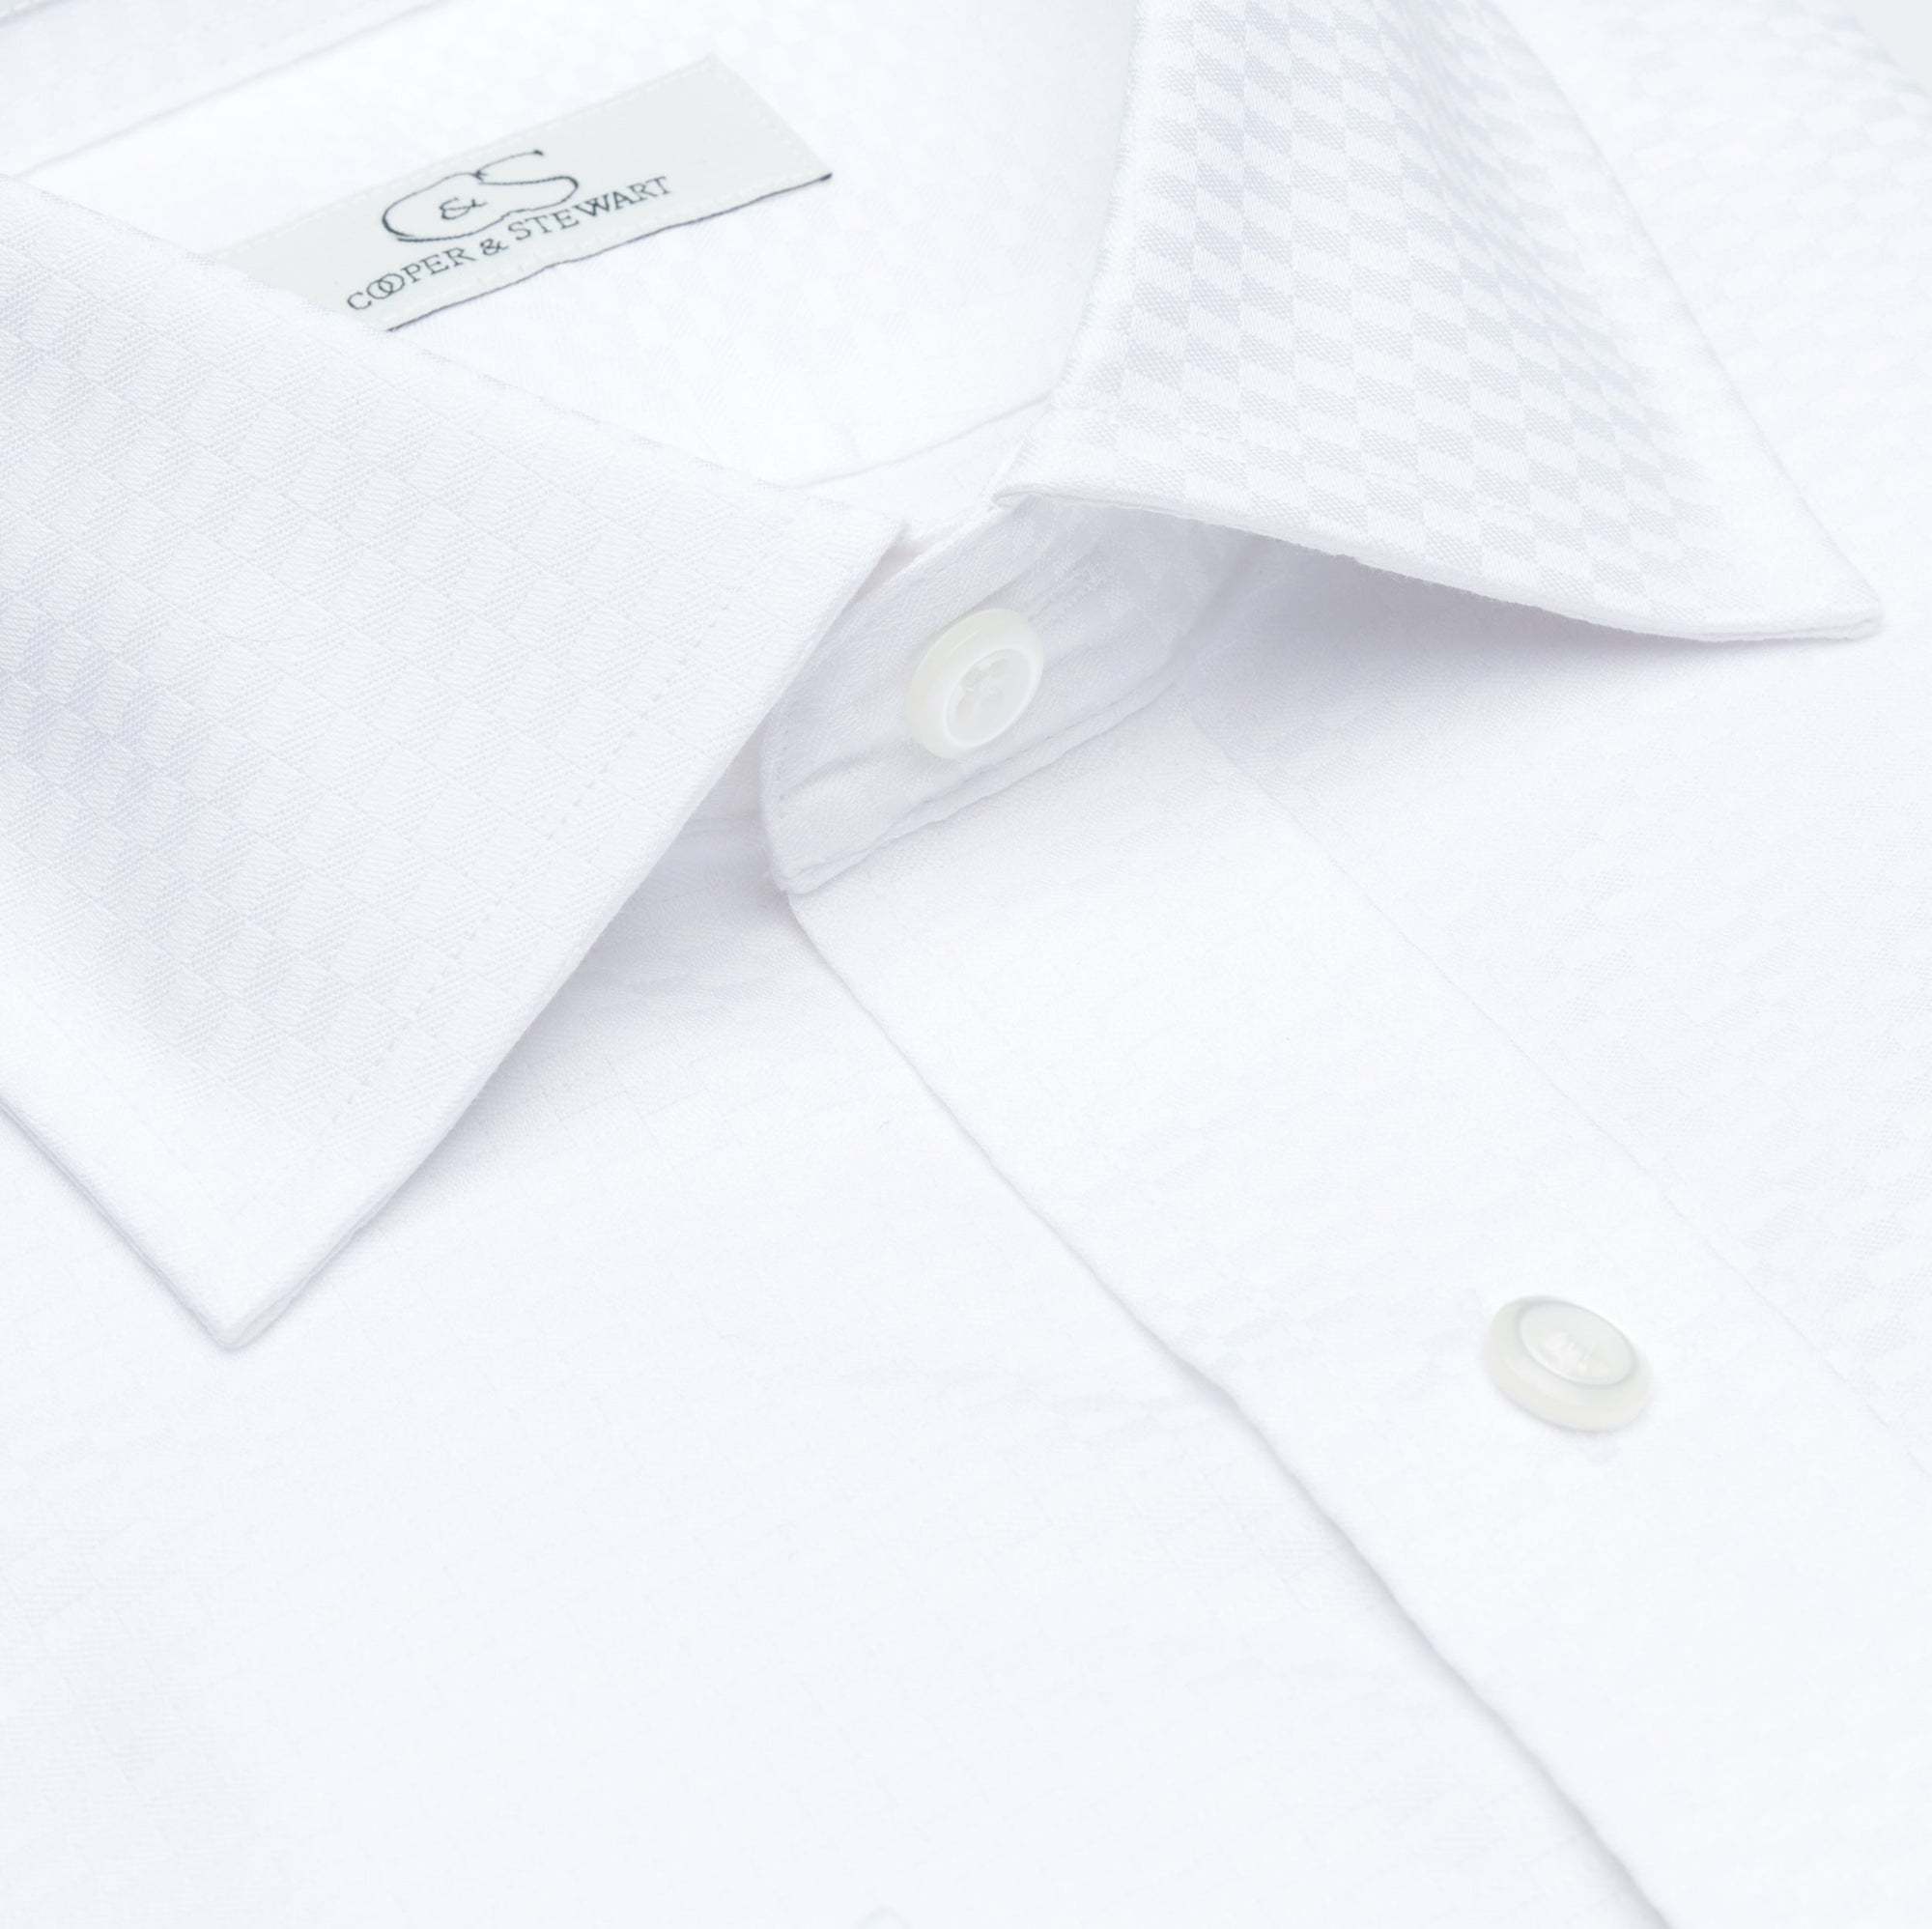 The Tuxedo Shirt - Wrinkle-Free Tonal Check Cotton Dress Shirt in White (Size 17.5 - 34/35) by Cooper & Stewart